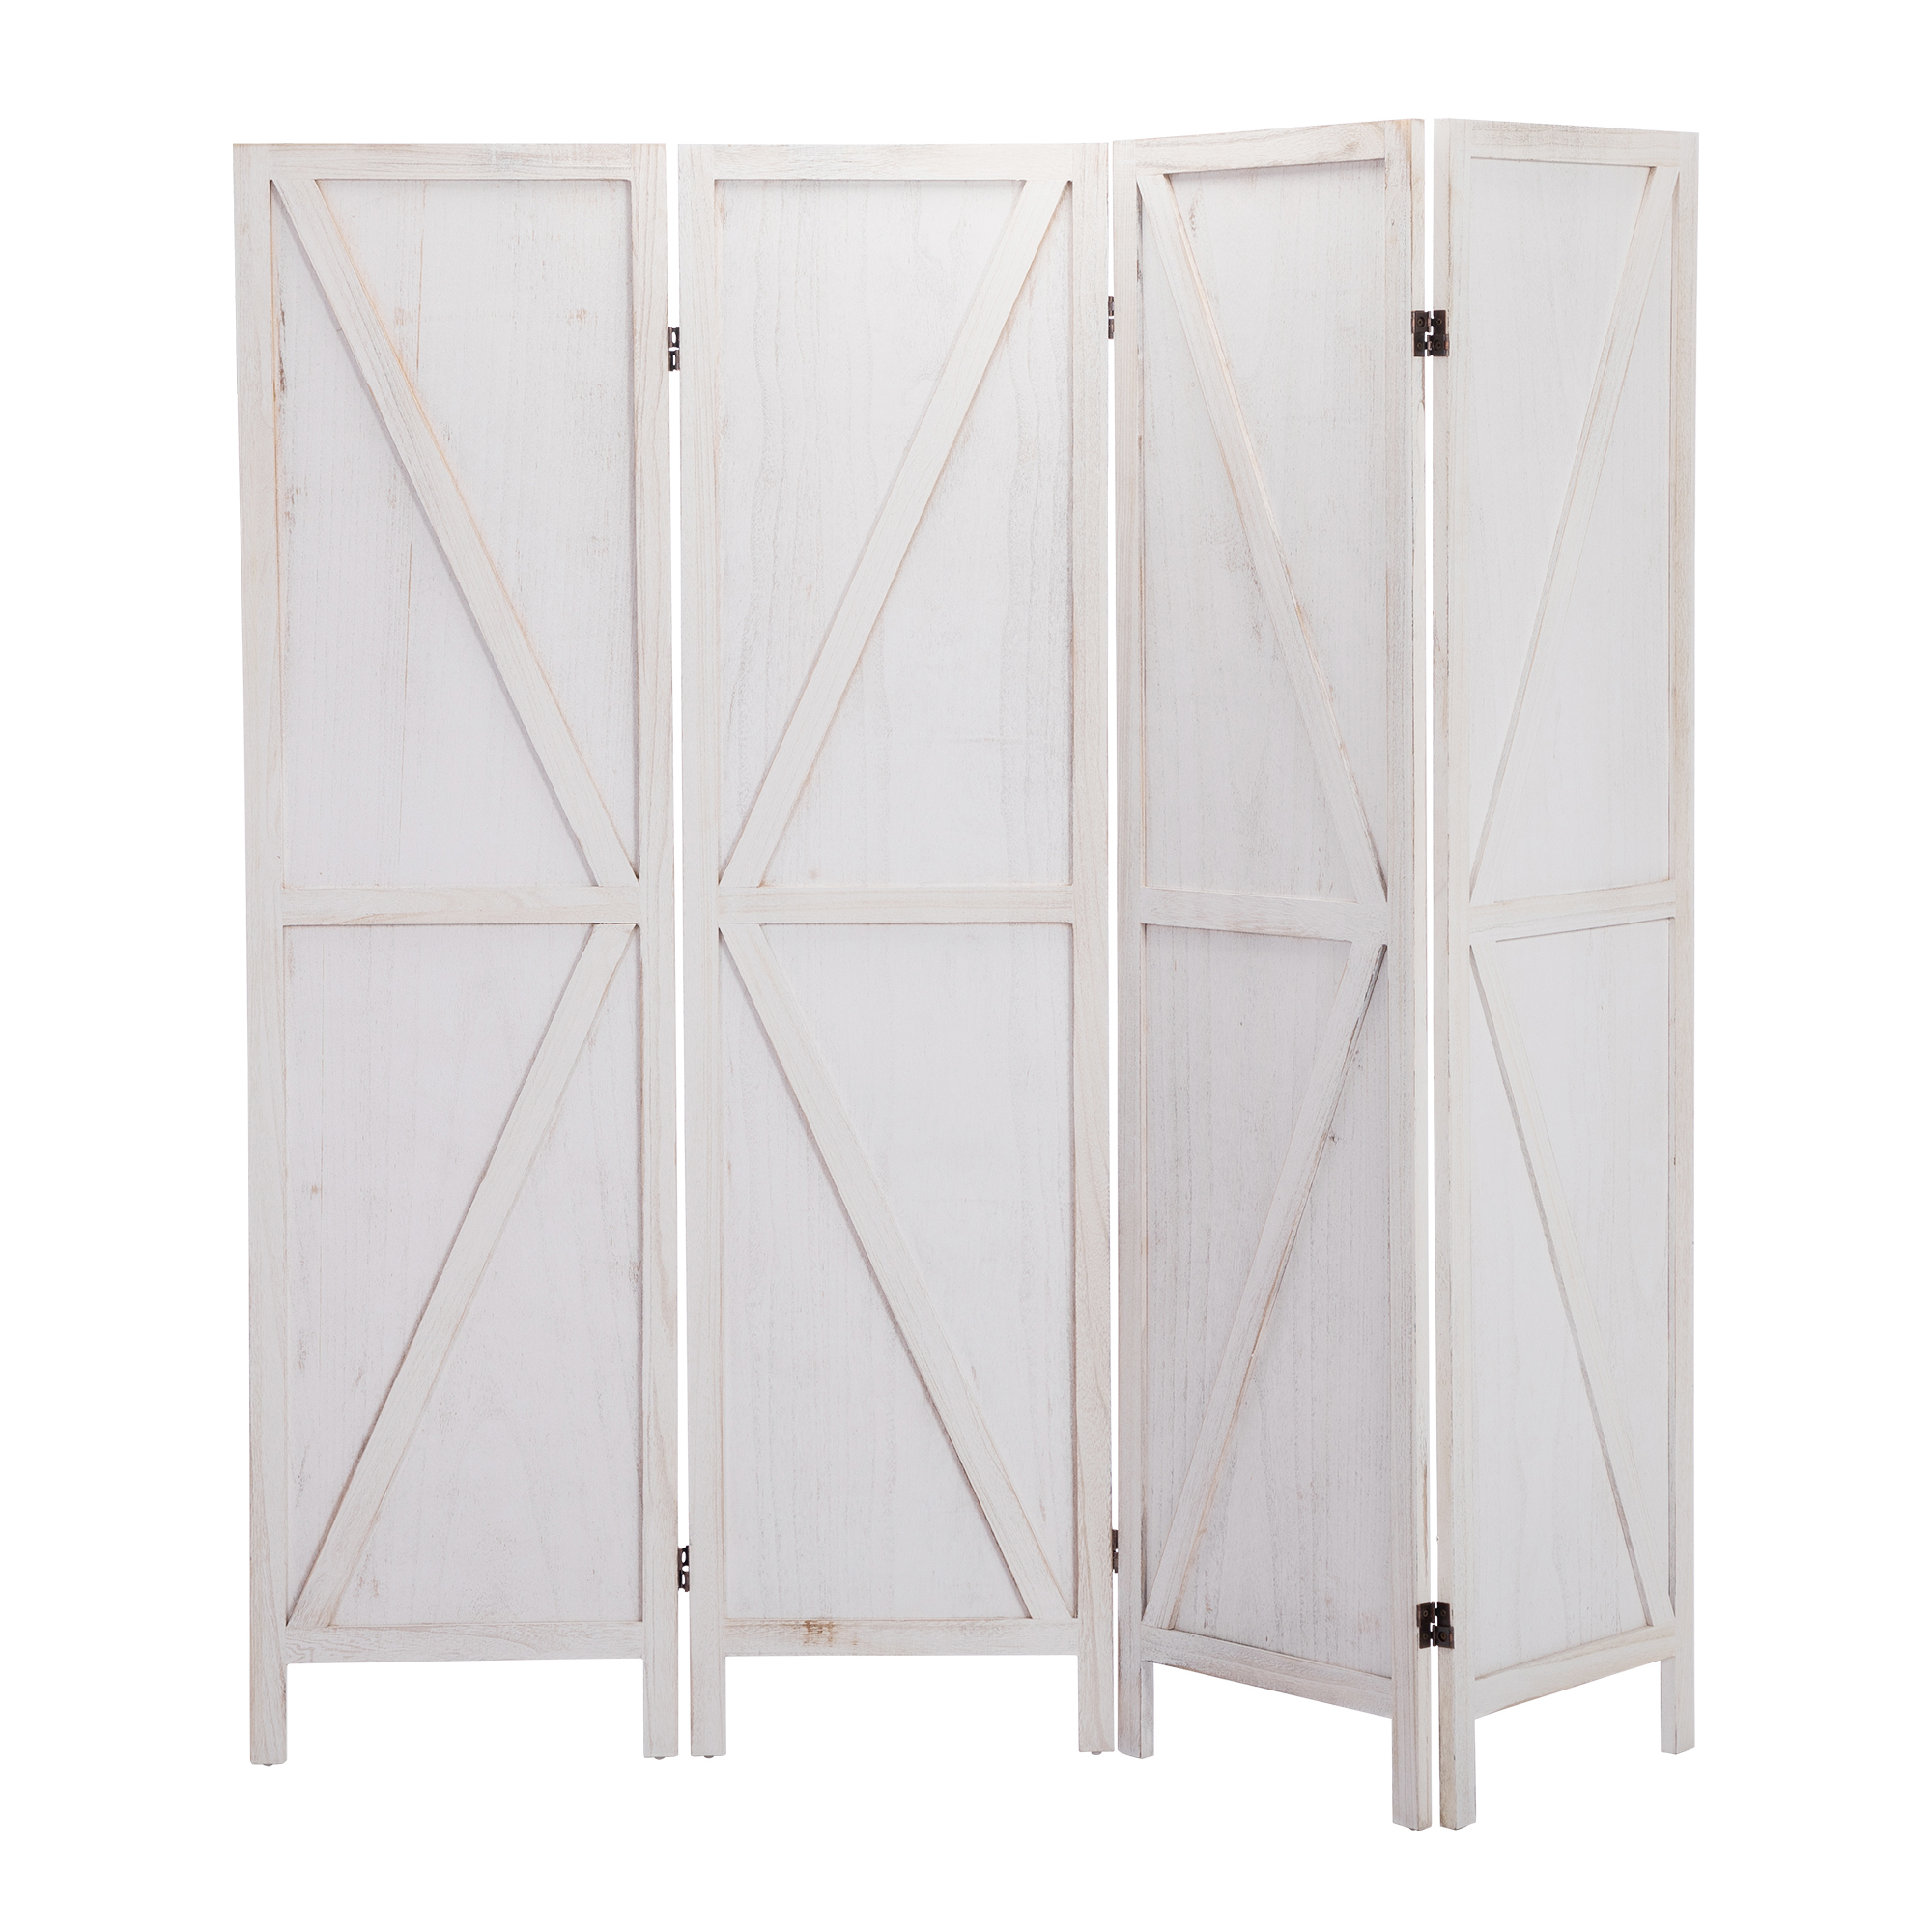 UWR-Nite Room dividers and Folding Privacy Screens, Privacy Screen, Partition Wall dividers for Rooms, Room Separator, Temporary Wall, Folding Screen - image 2 of 7